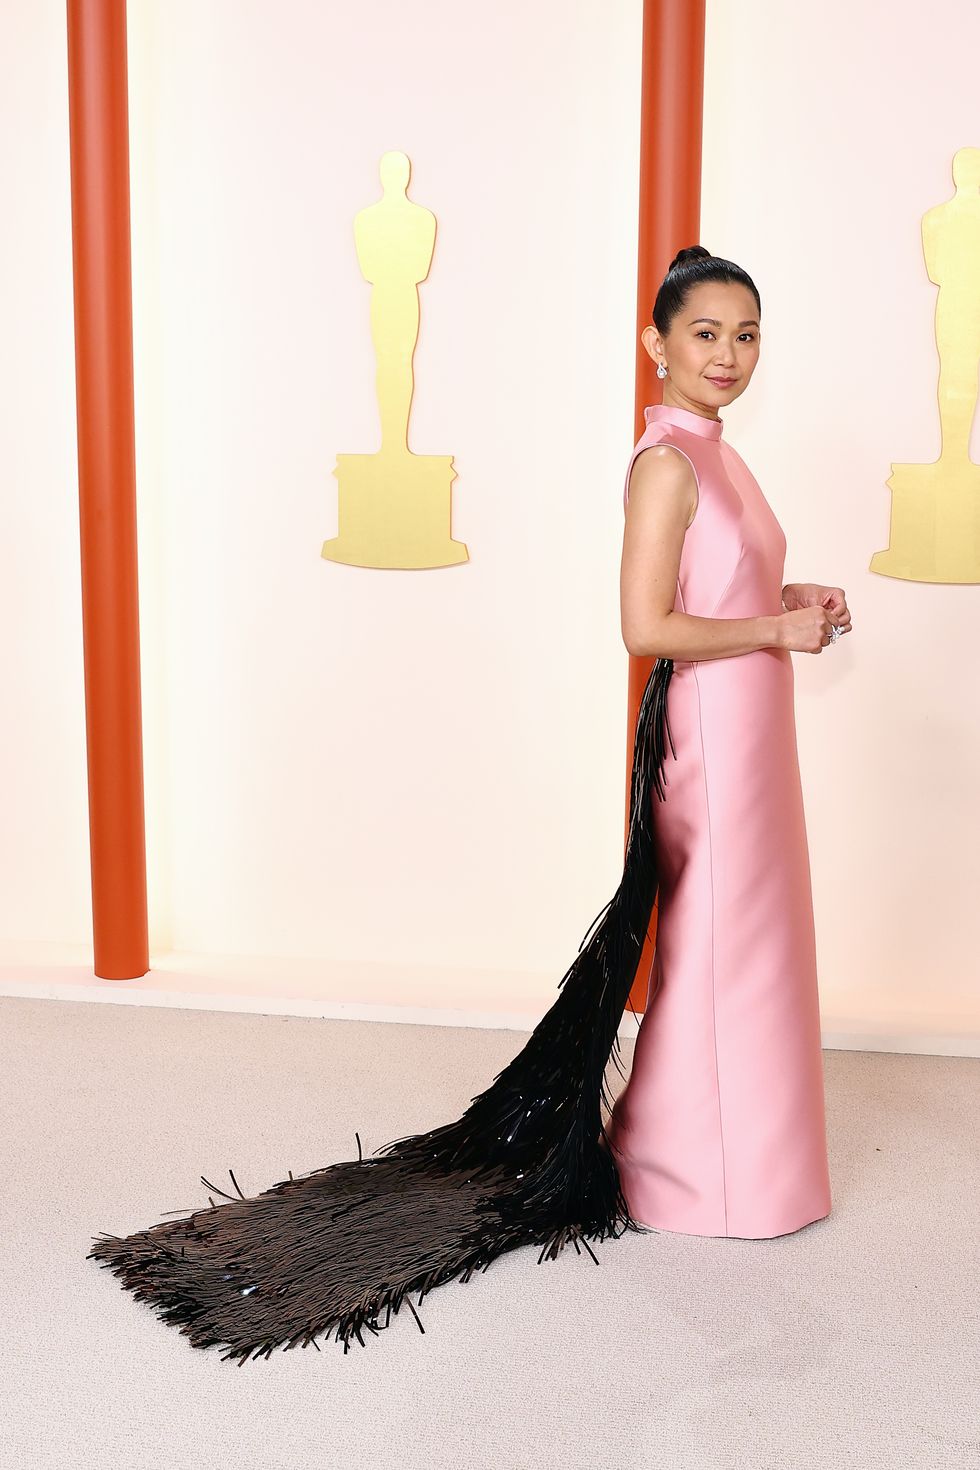 Louis Vuitton: Celebrities In Louis Vuitton At The 95th Academy